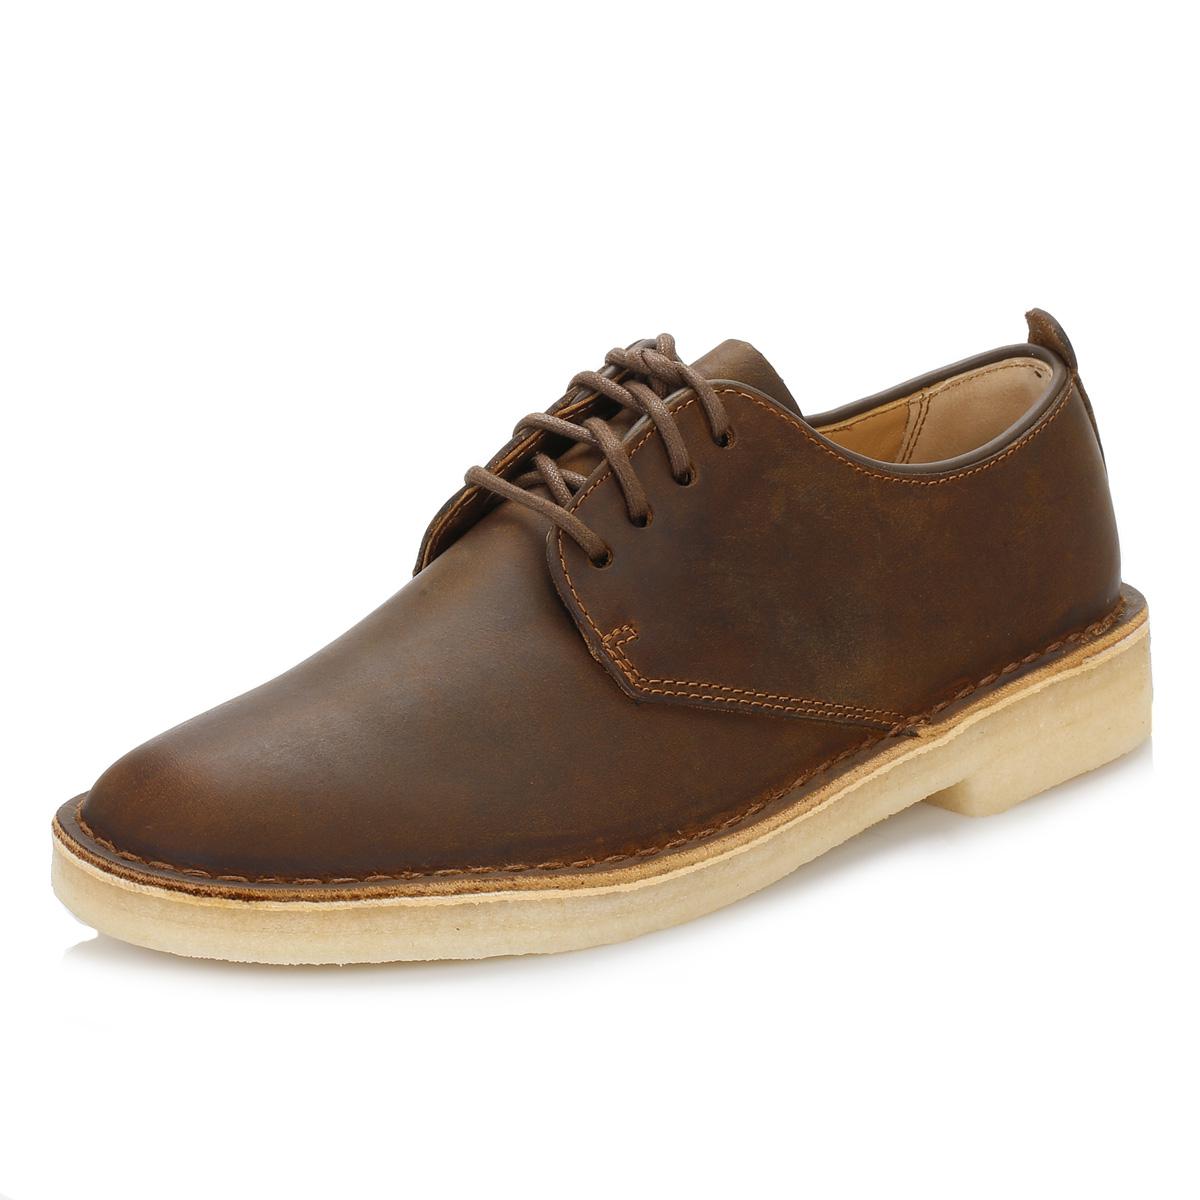 Clarks Leather Mens Beeswax Desert London Shoes in Brown for Men - Lyst